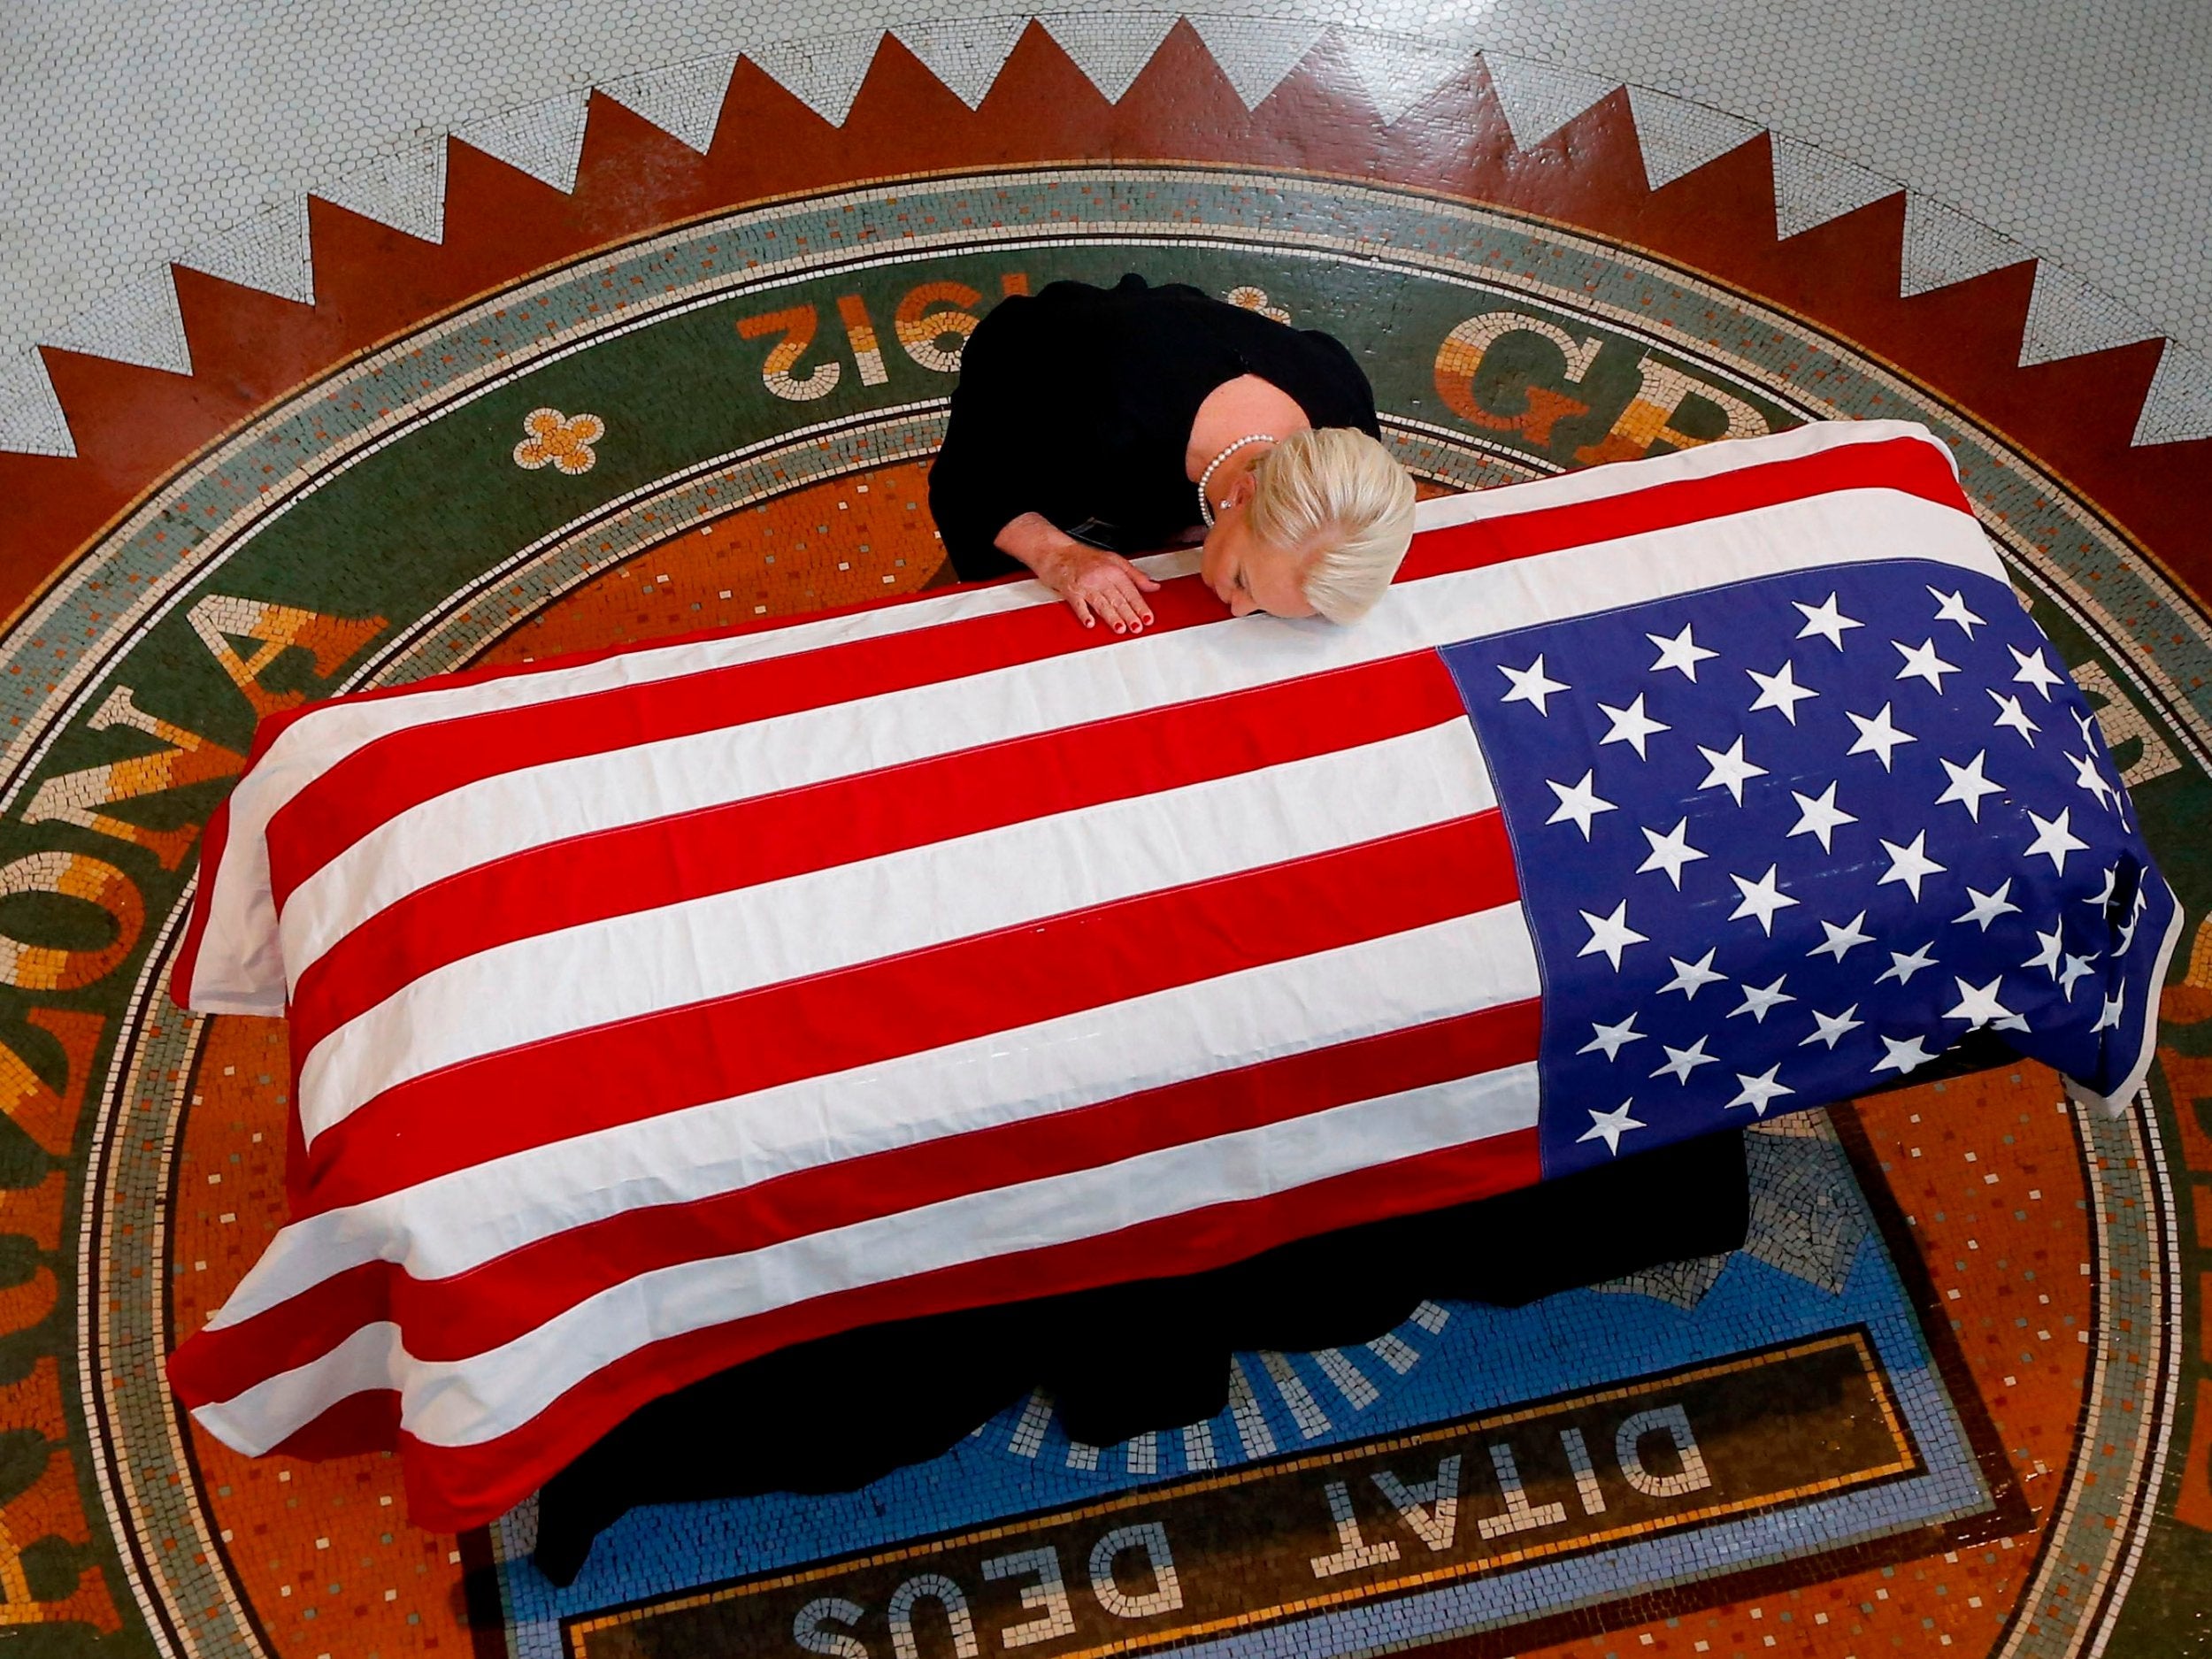 We confused John McCain’s burial and his past imprisonment this week